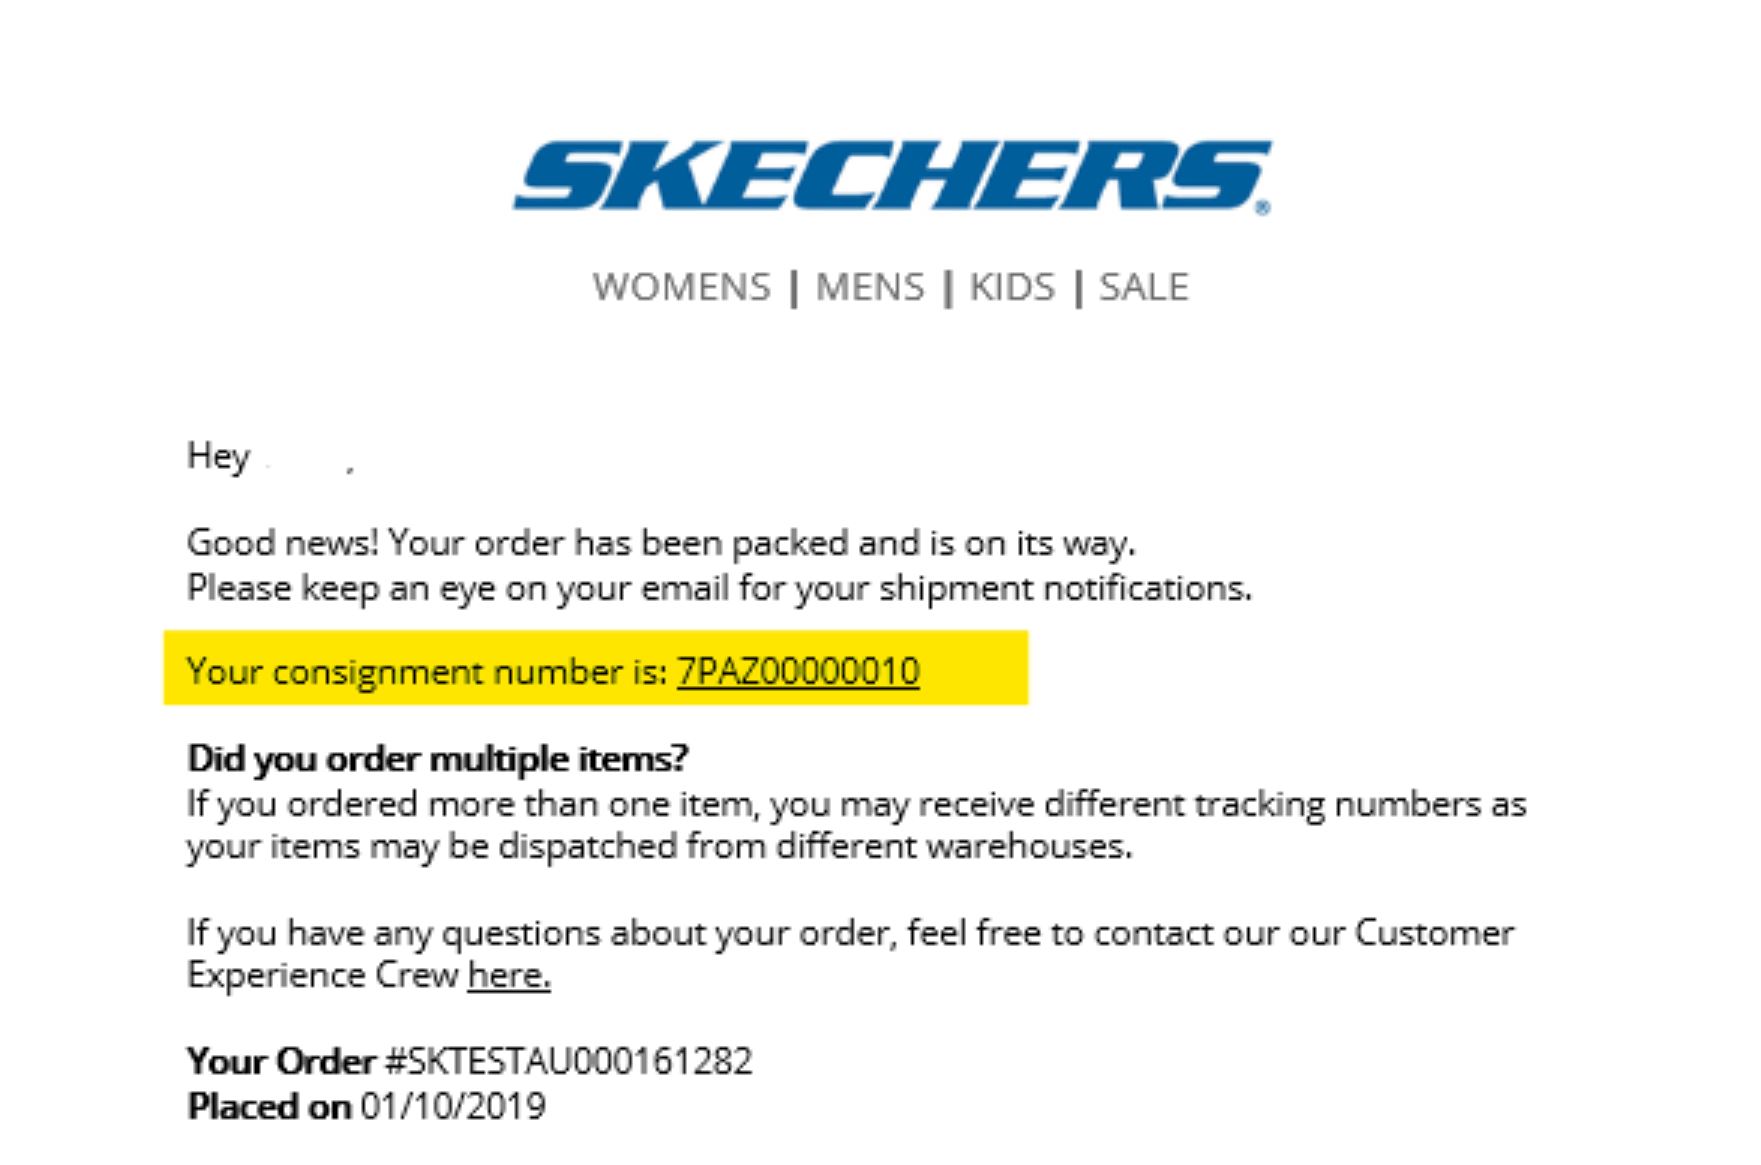 How to Track Skechers Order?